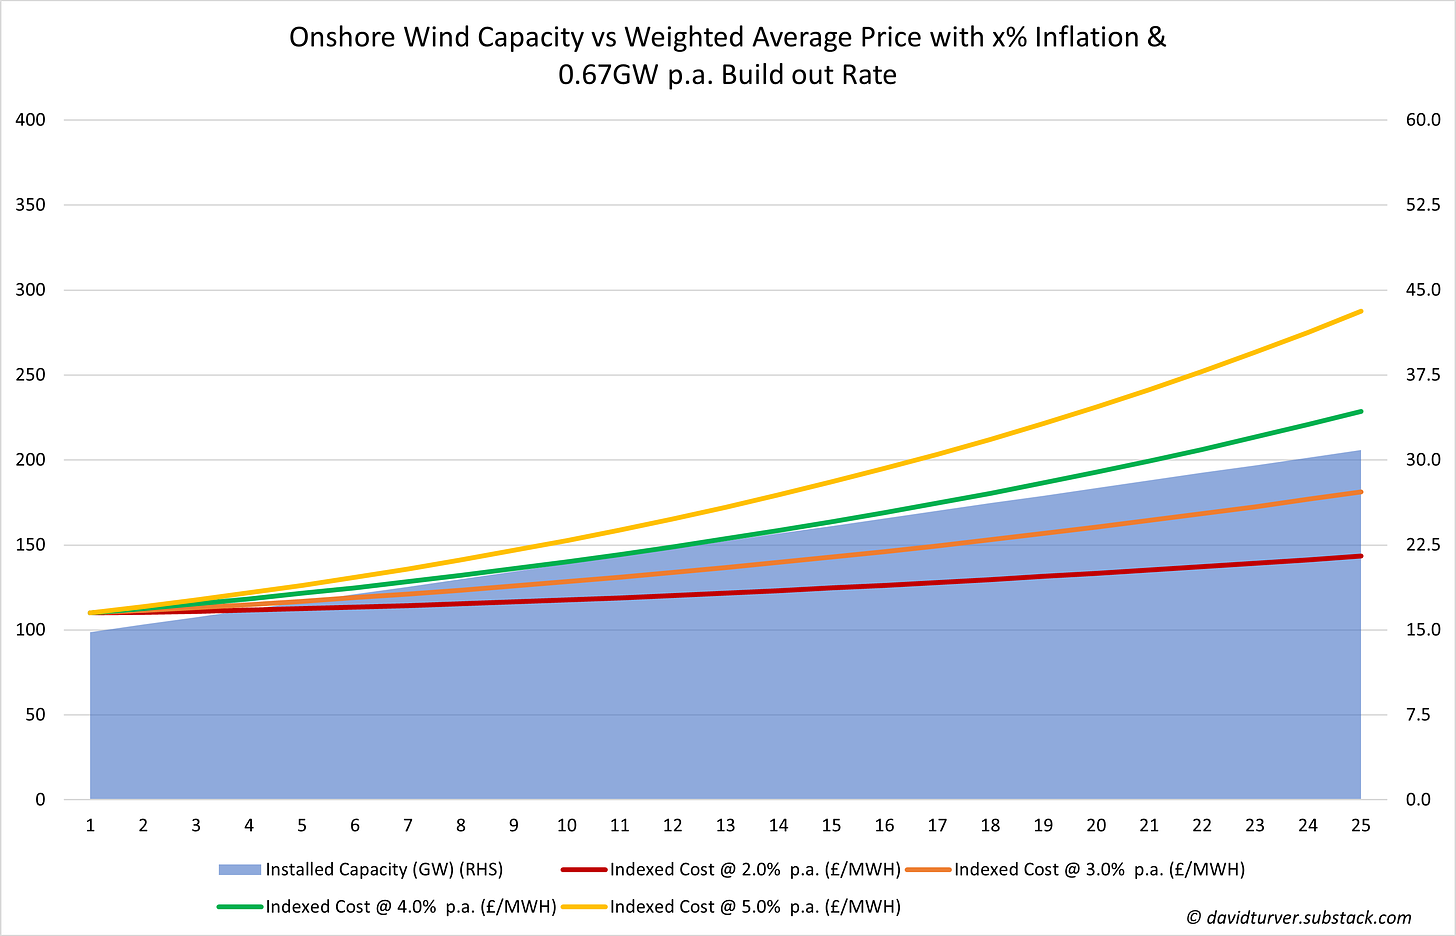 Figure 5 - Onshore Wind Capacity vs Weighted Average Price with x% Inflation + 0.67GW Build Out Rate